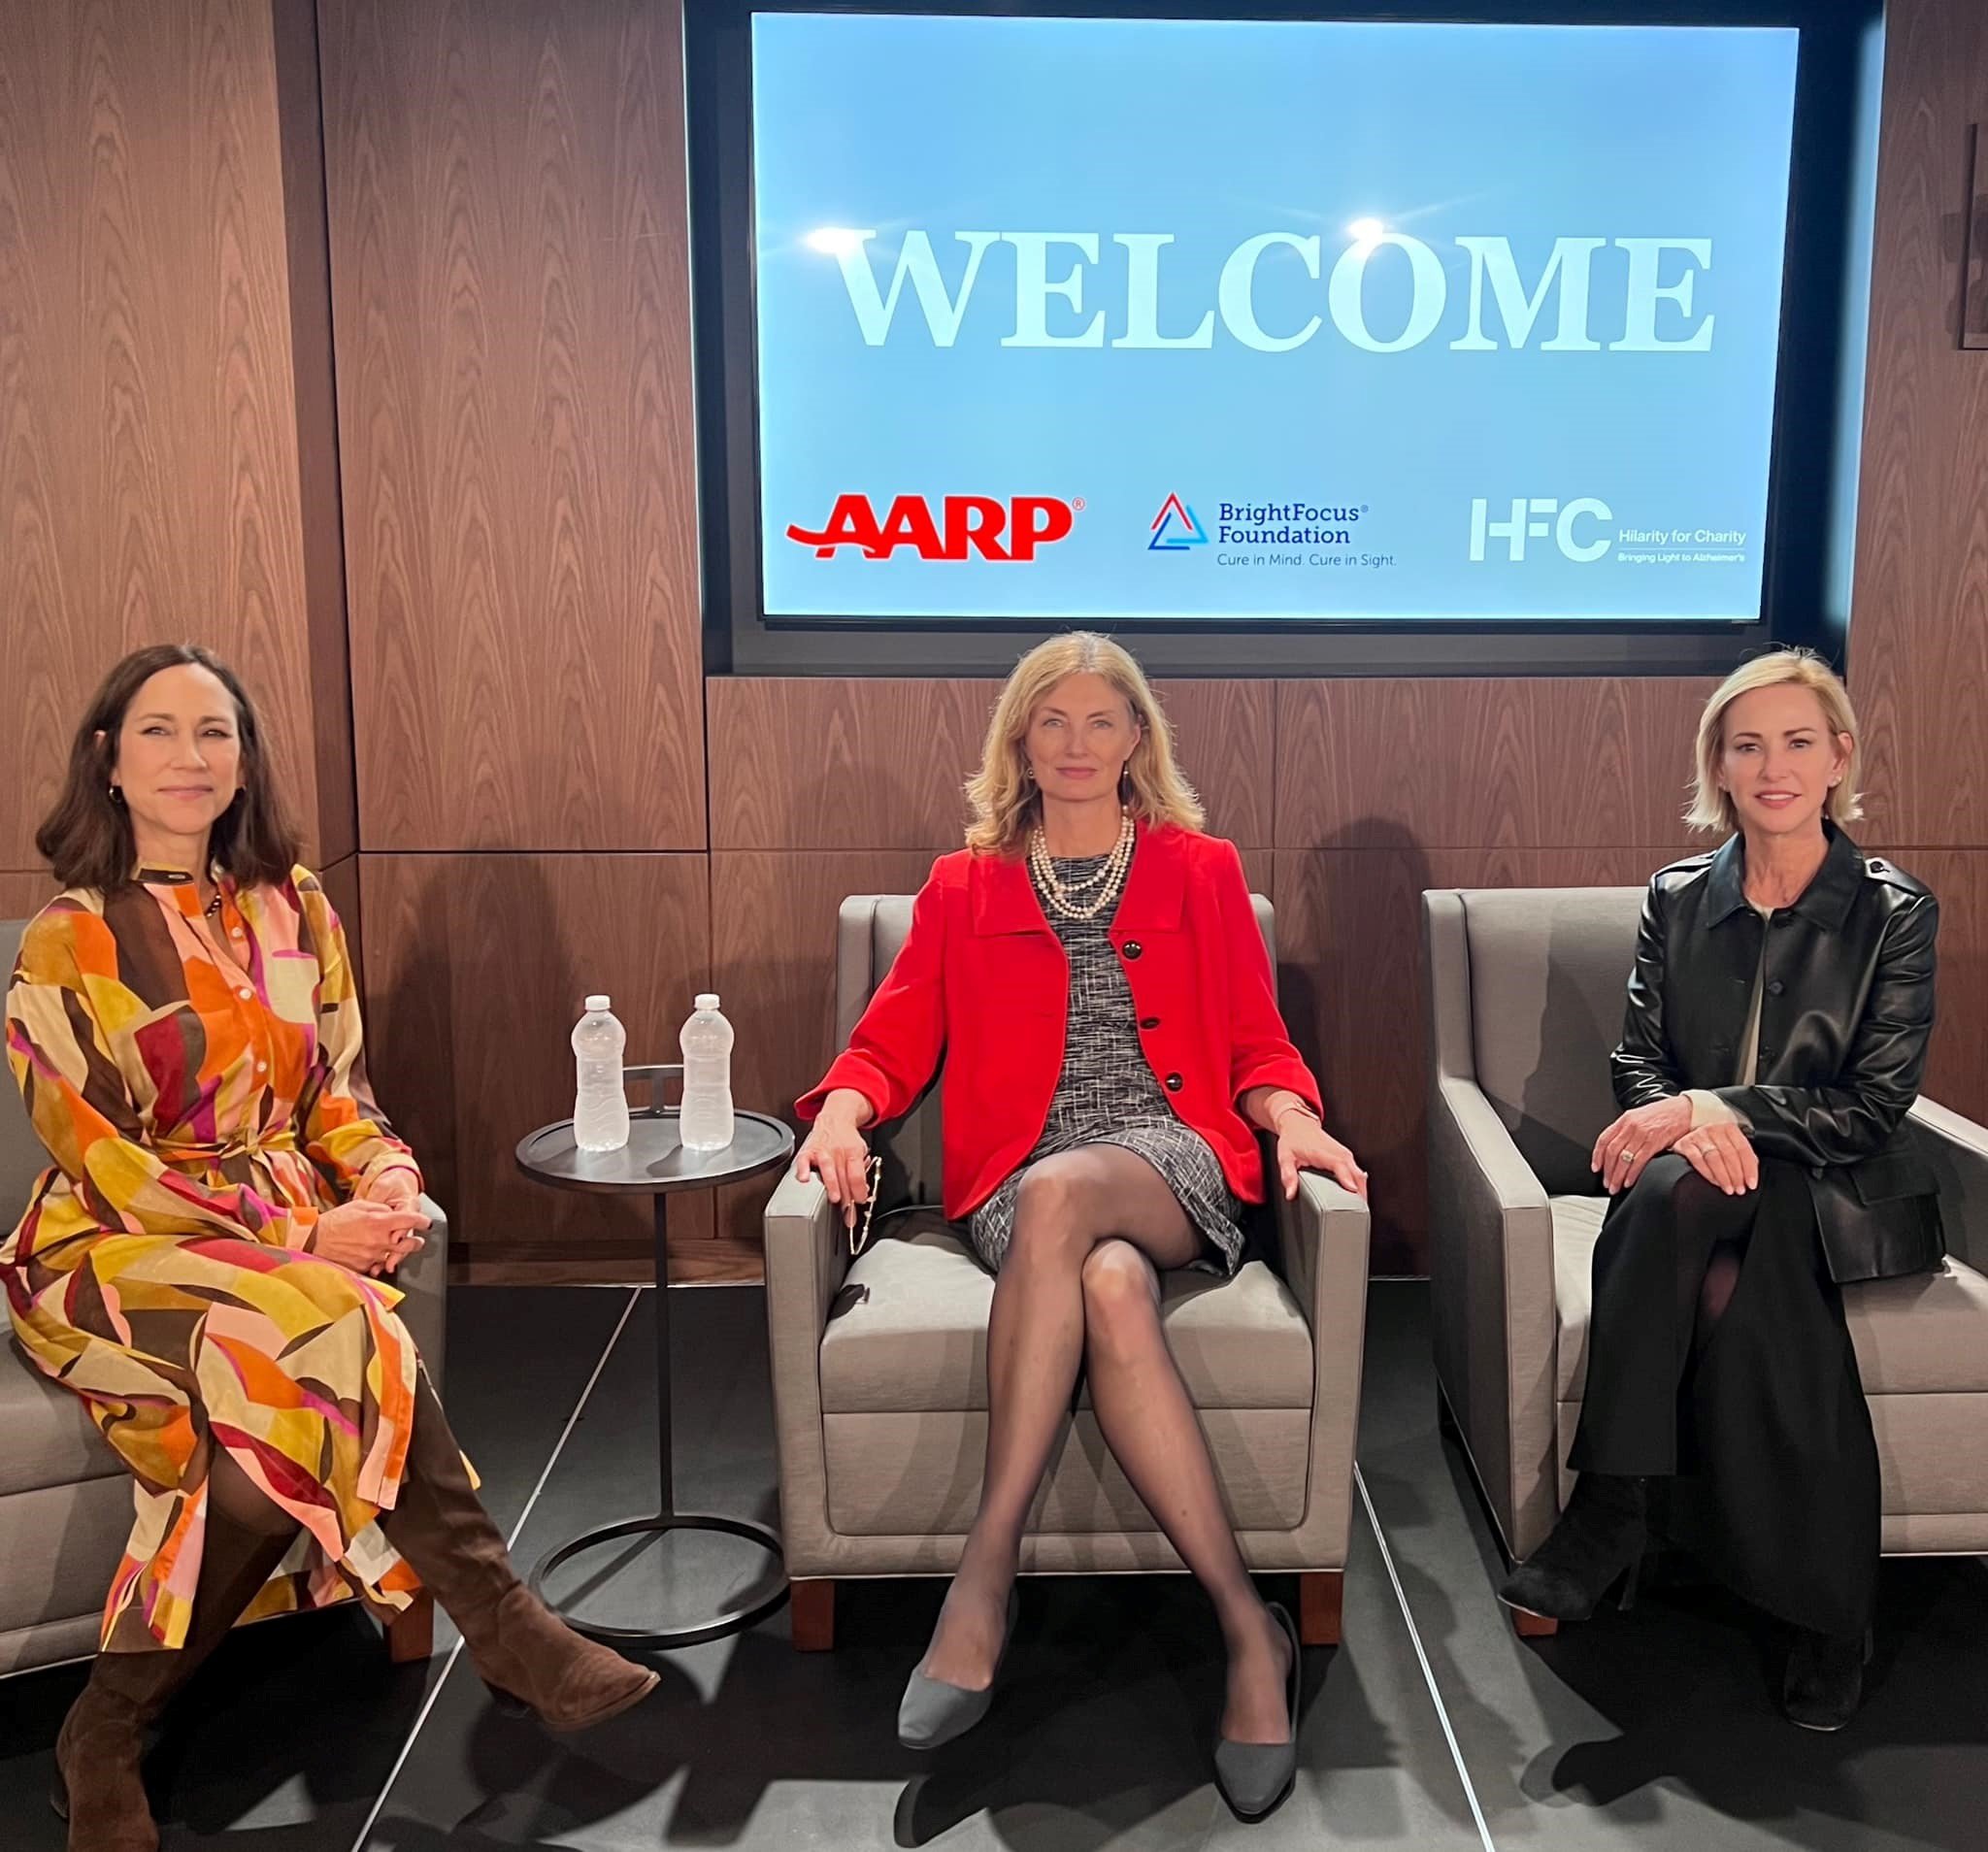 Organizers included Alliance to Improve Dementia Steering Committee members Bonnie Wattles, Hilarity for Charity; Sarah Lenz Lock, AARP; and Nancy Lynn, BrightFocus Foundation